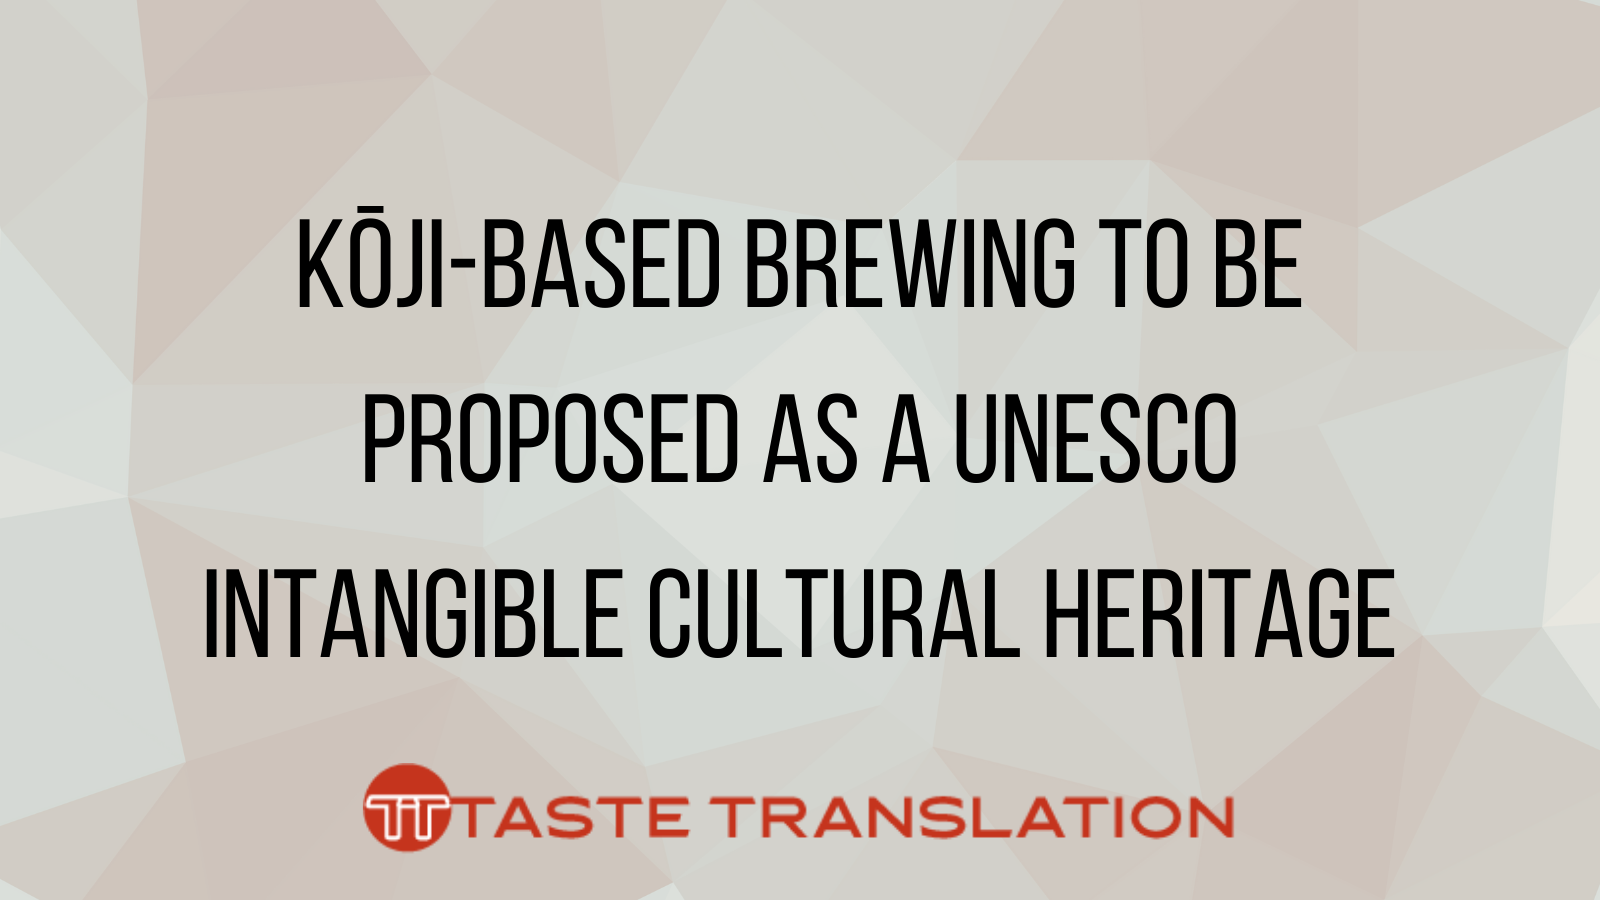 Headline: Kōji-based brewing to be proposed as a UNESCO intangible cultural heritage